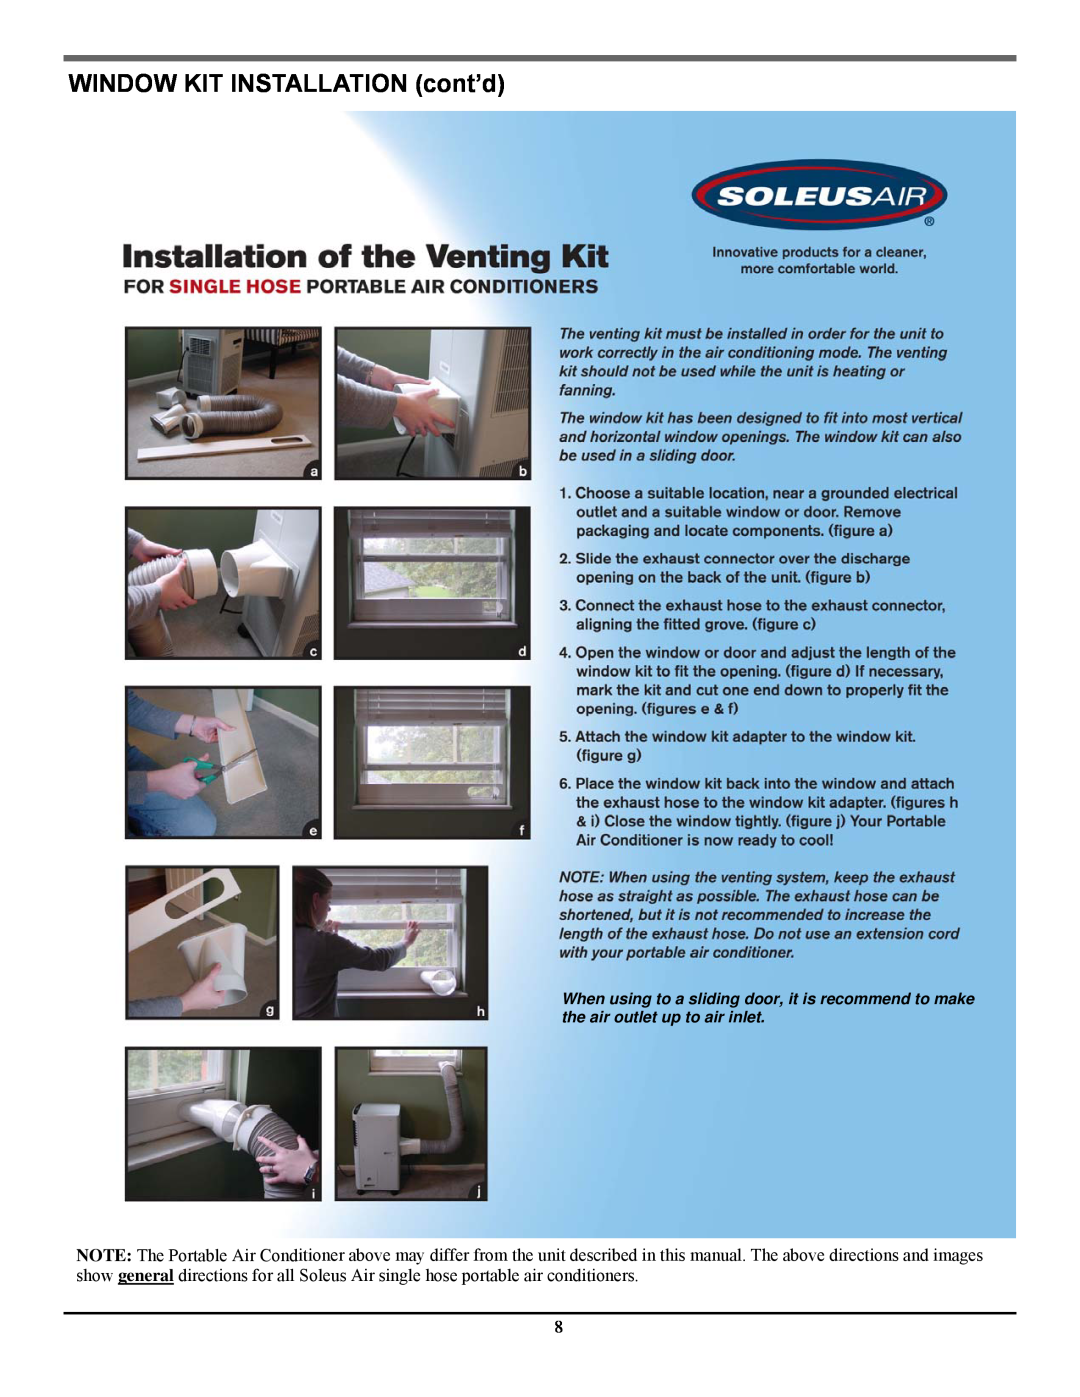 Soleus Air PH3-12R-03 operating instructions WINDOW KIT INSTALLATION cont’d 